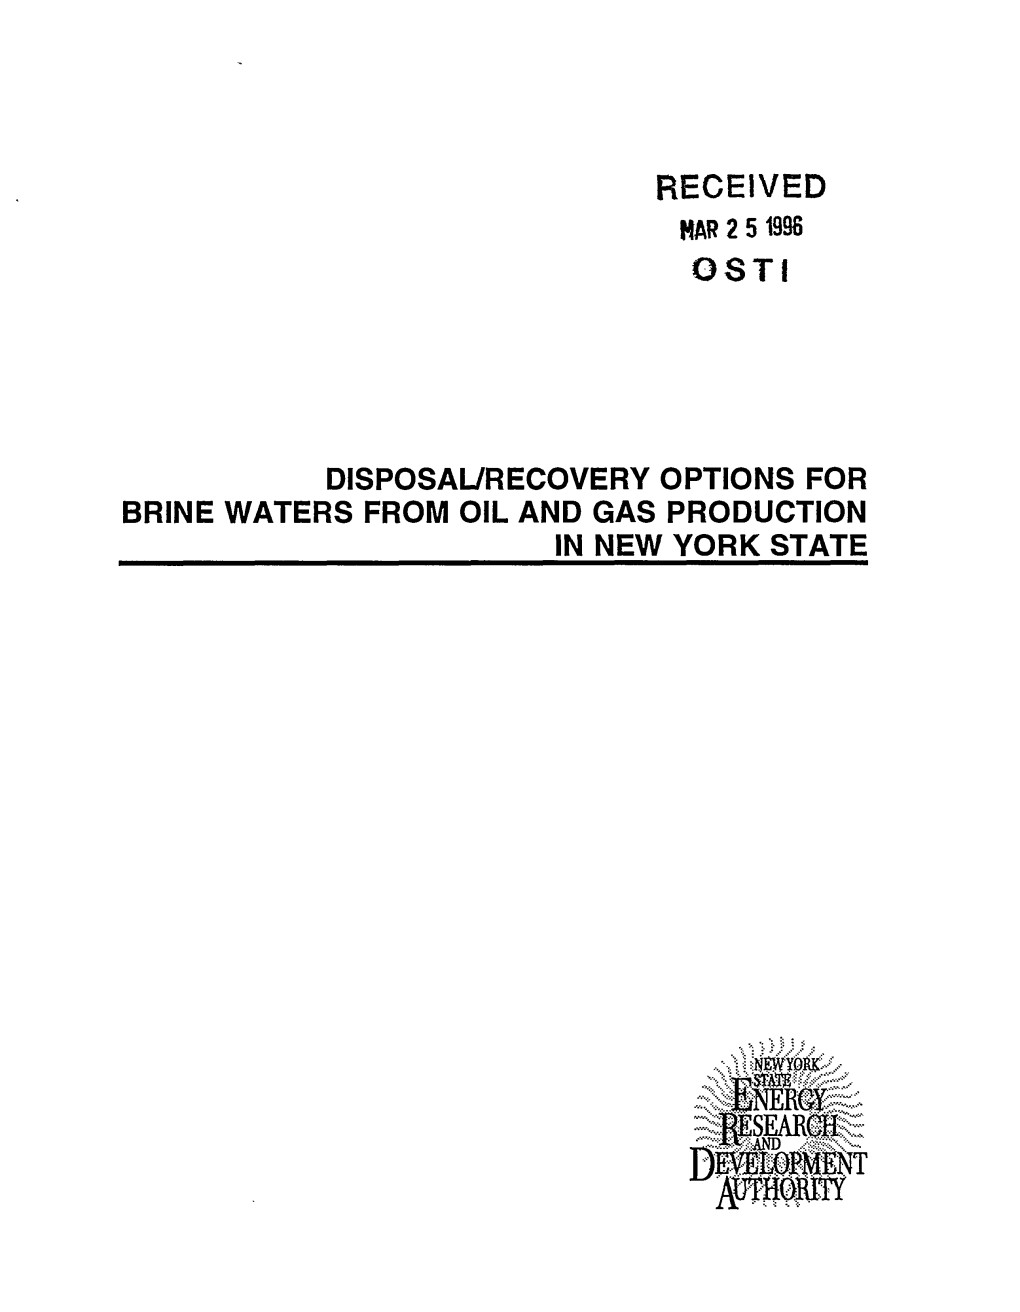 Gst! Disposal/Recovery Options for Brine Waters from Oil and Gas Production